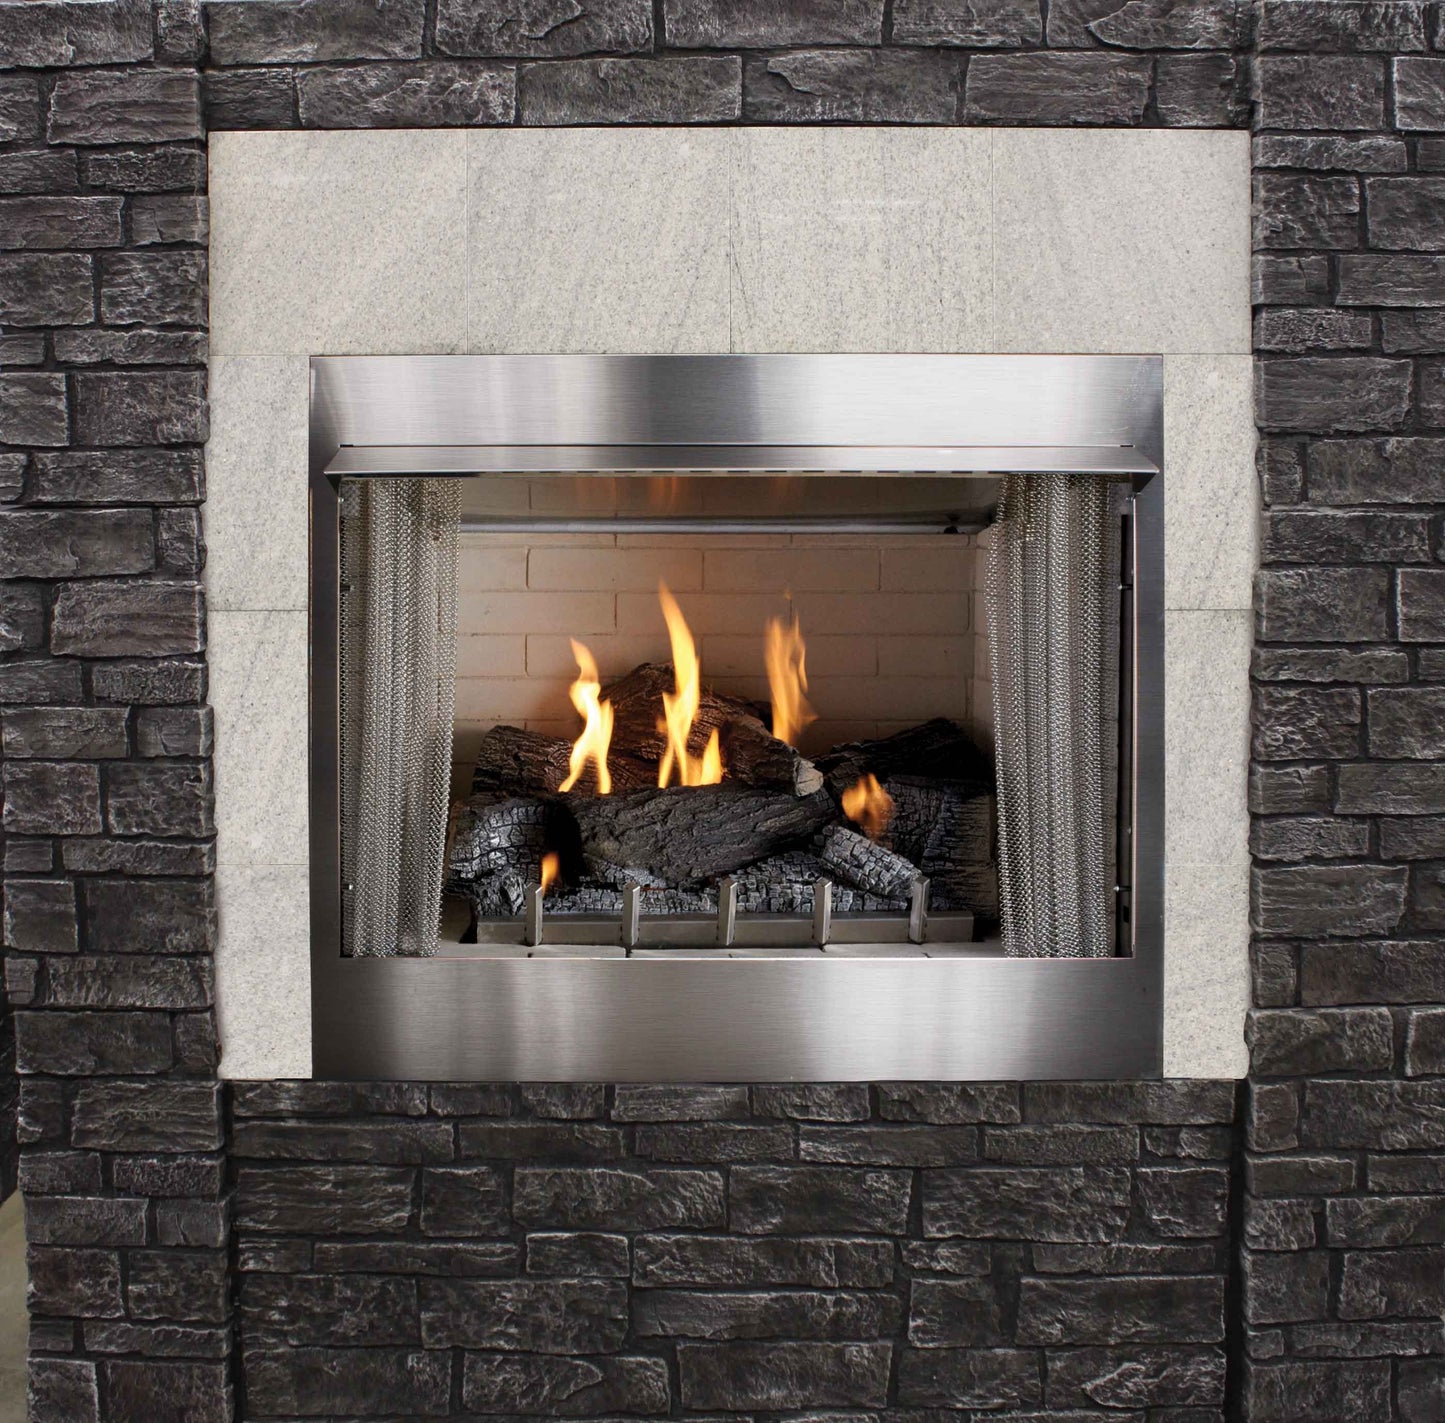 op36fp72mp/op36fp72mn 36" outdoor traditional fireplace intermittent ignition 50k btu